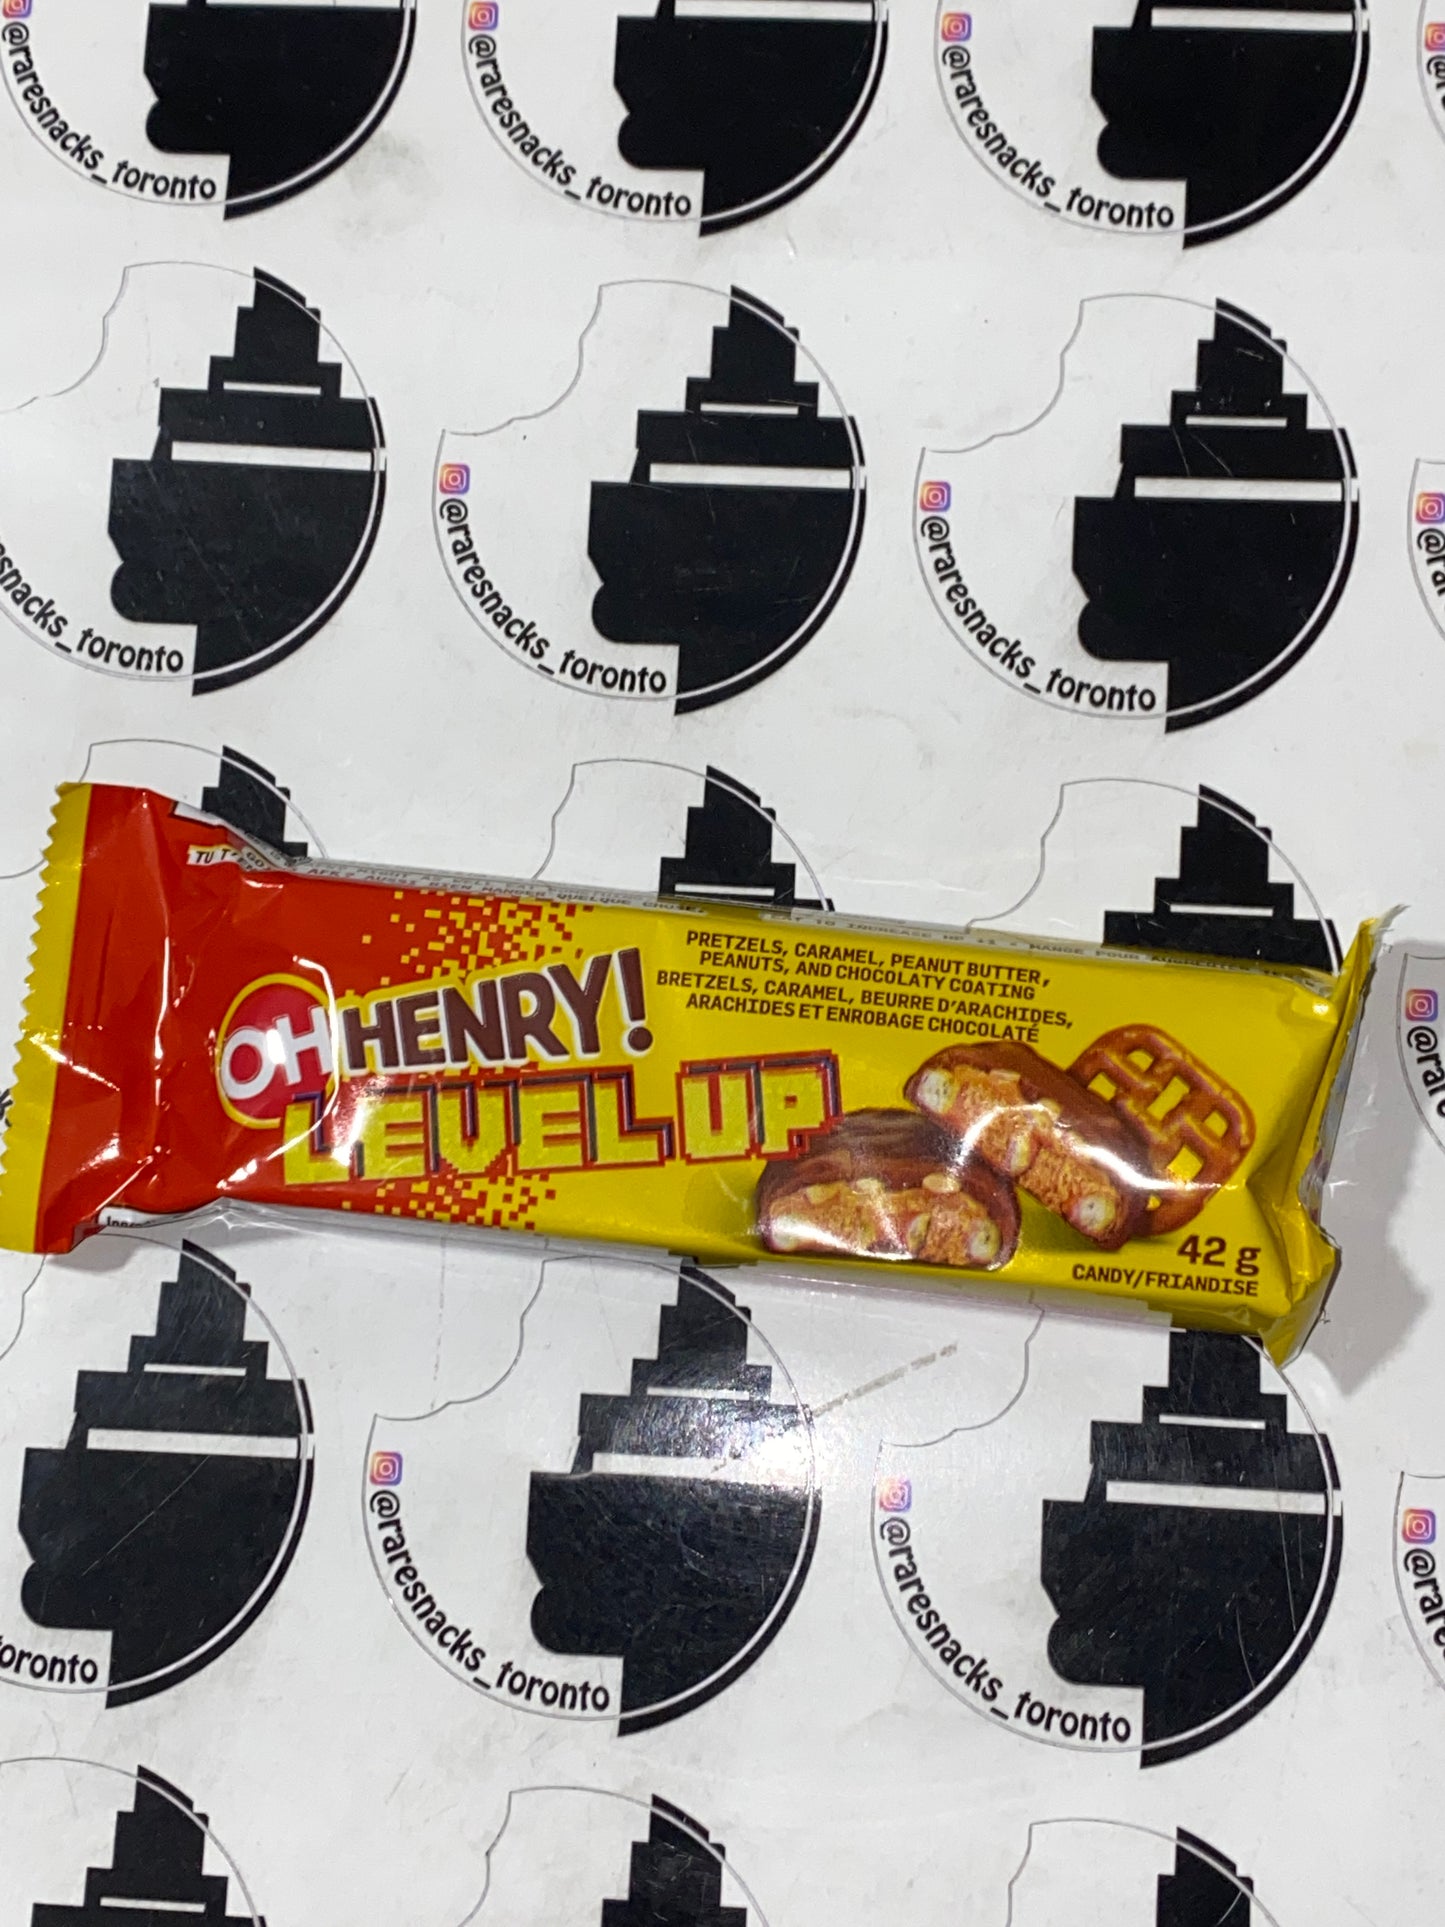 Oh Henry Level Up 42g